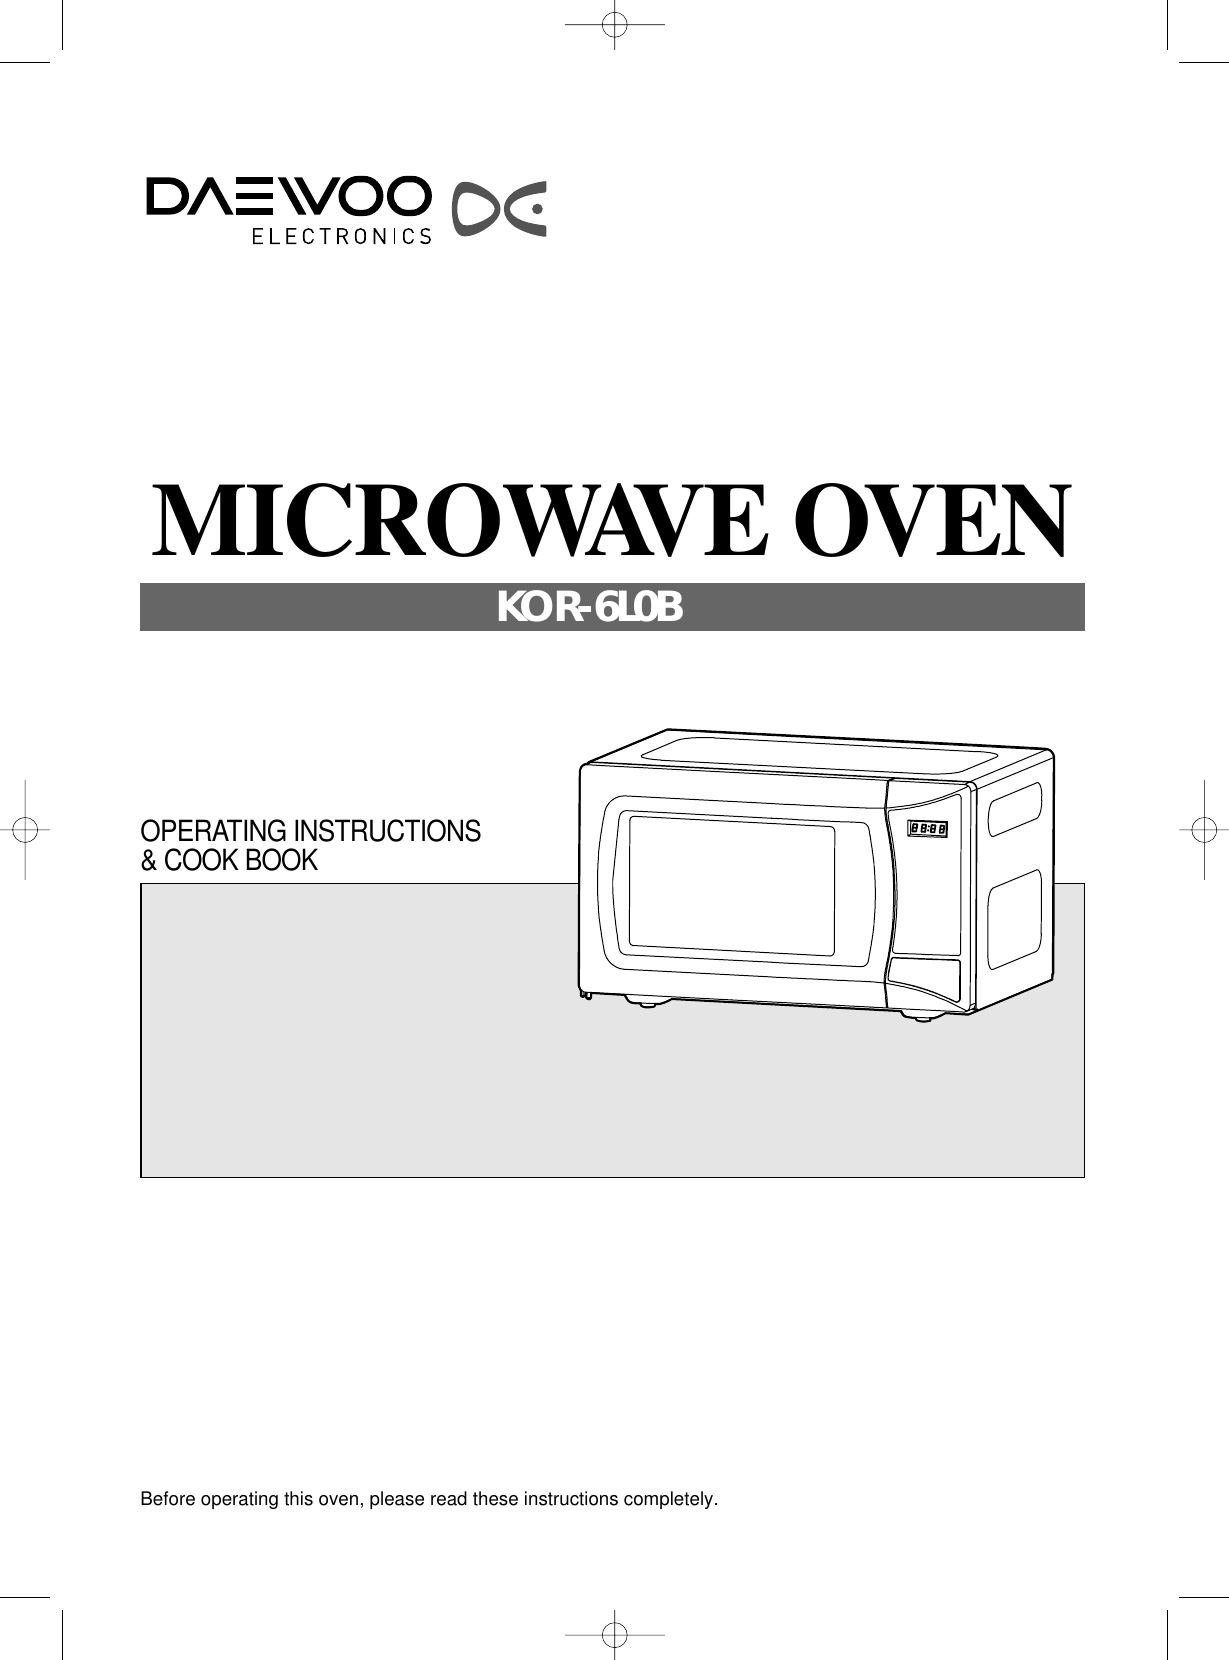 Before operating this oven, please read these instructions completely.OPERATING INSTRUCTIONS&amp; COOK BOOKMICROWAVE OVENKOR-6L0B